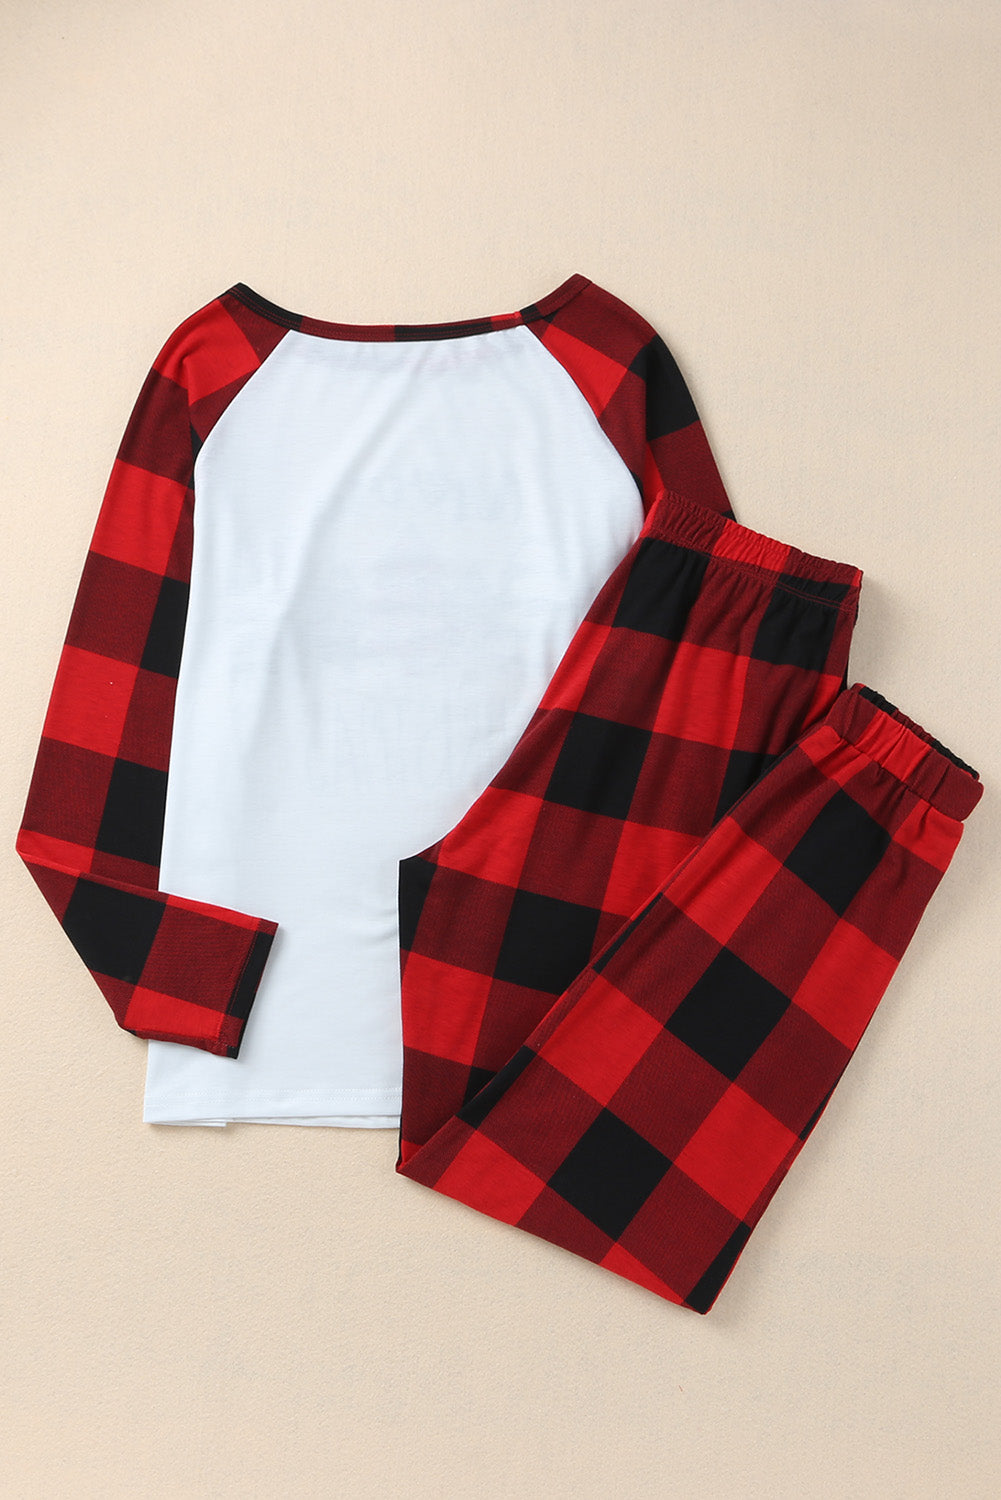 Red Plaid Merry Christmas Casual Top Pants Loungewear Set